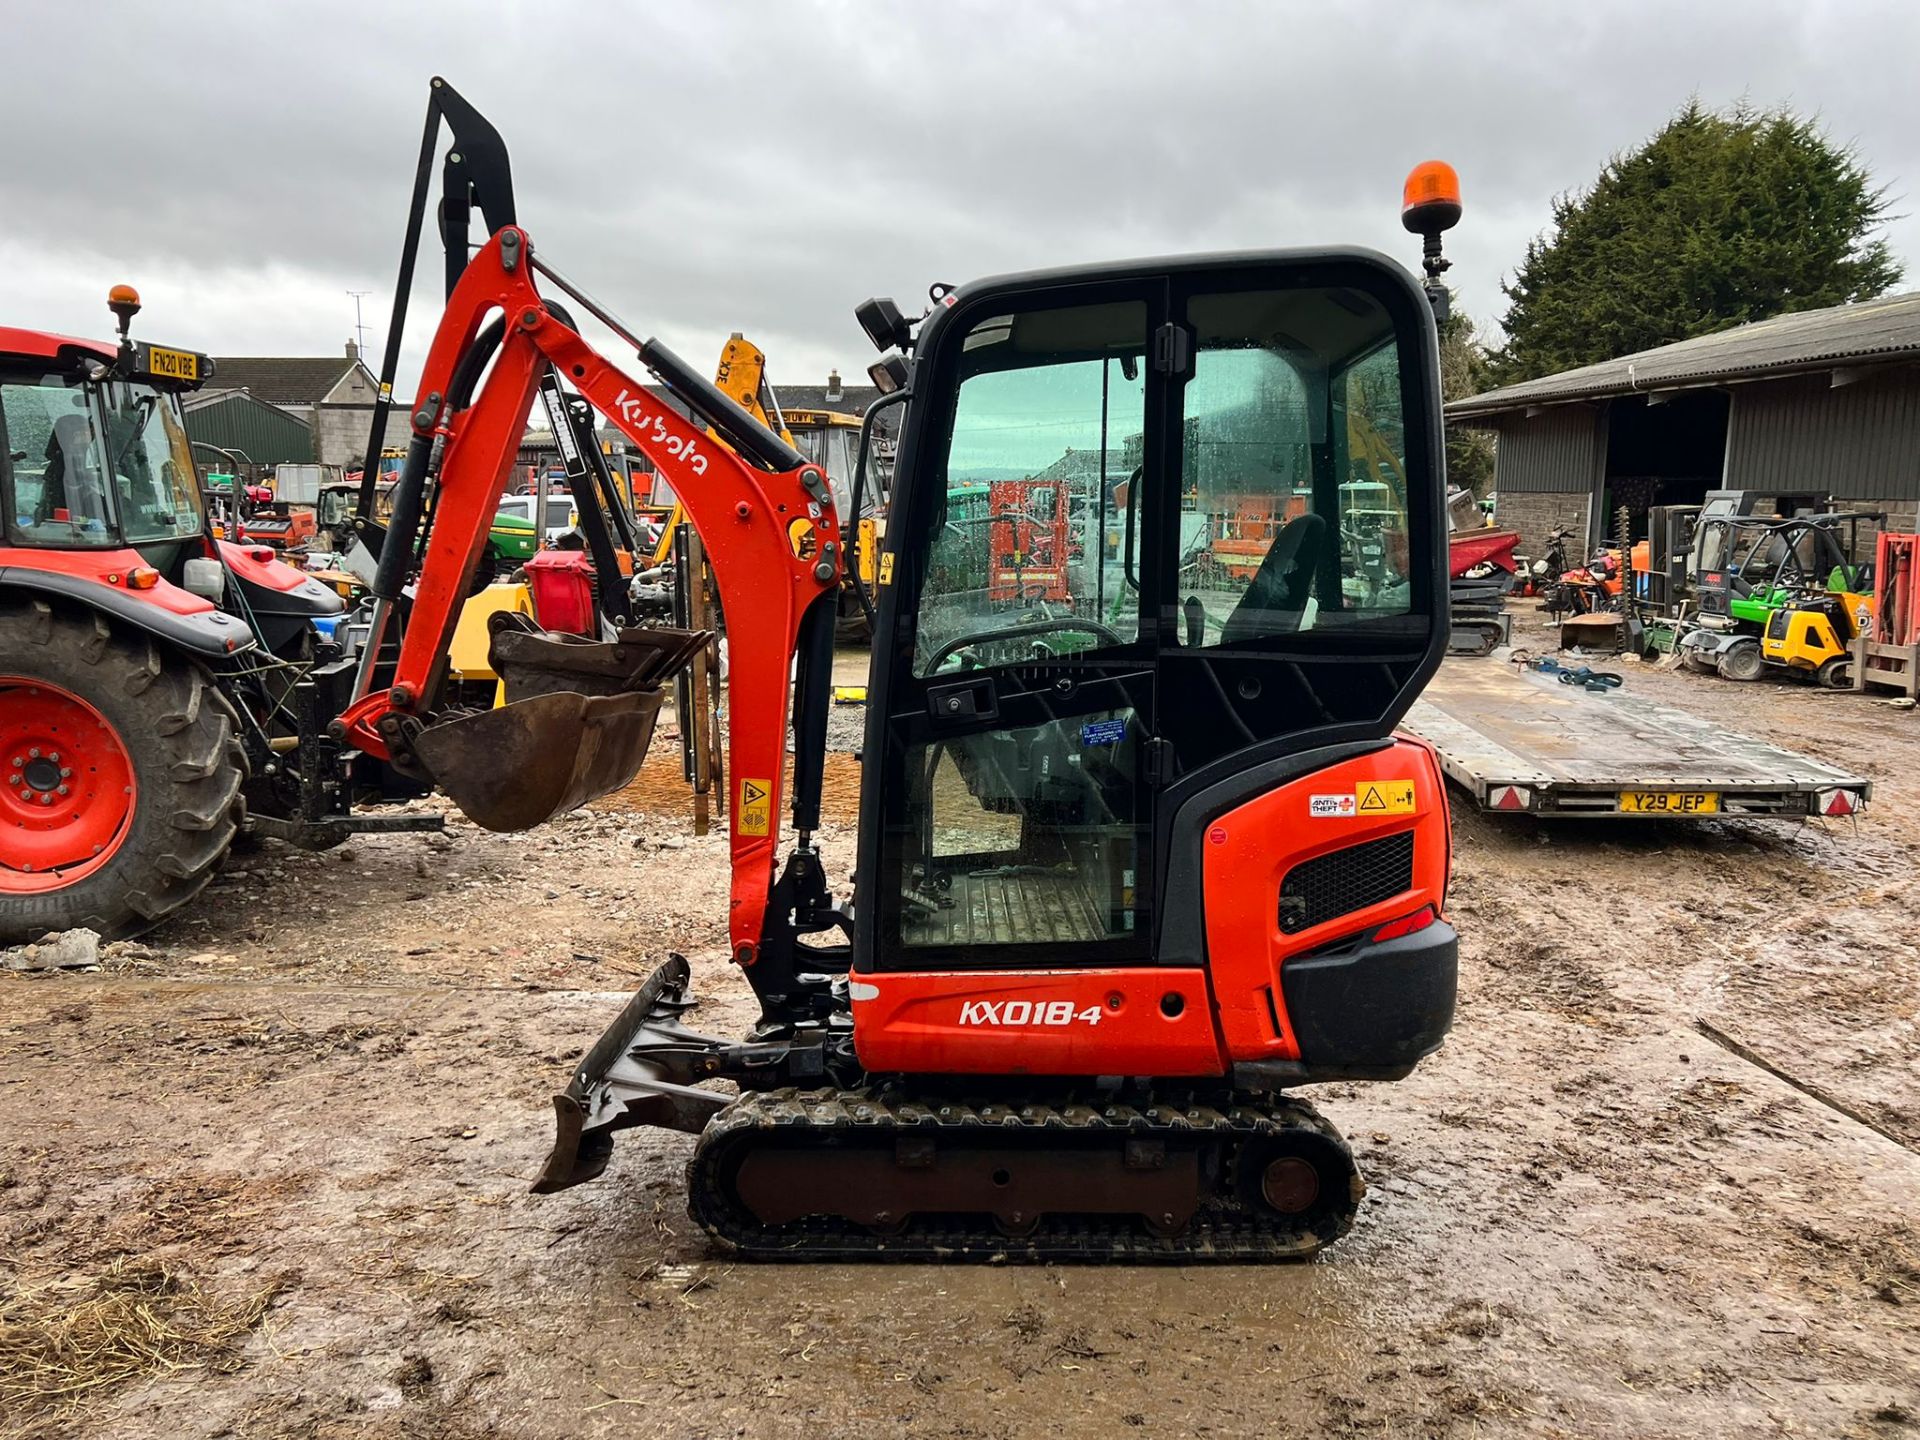 2018 KUBOTA KX018-4 1.8 TON MINI DIGGER, RUNS DRIVES AND DIGS, SHOWING A LOW 1681 HOURS - Image 4 of 20